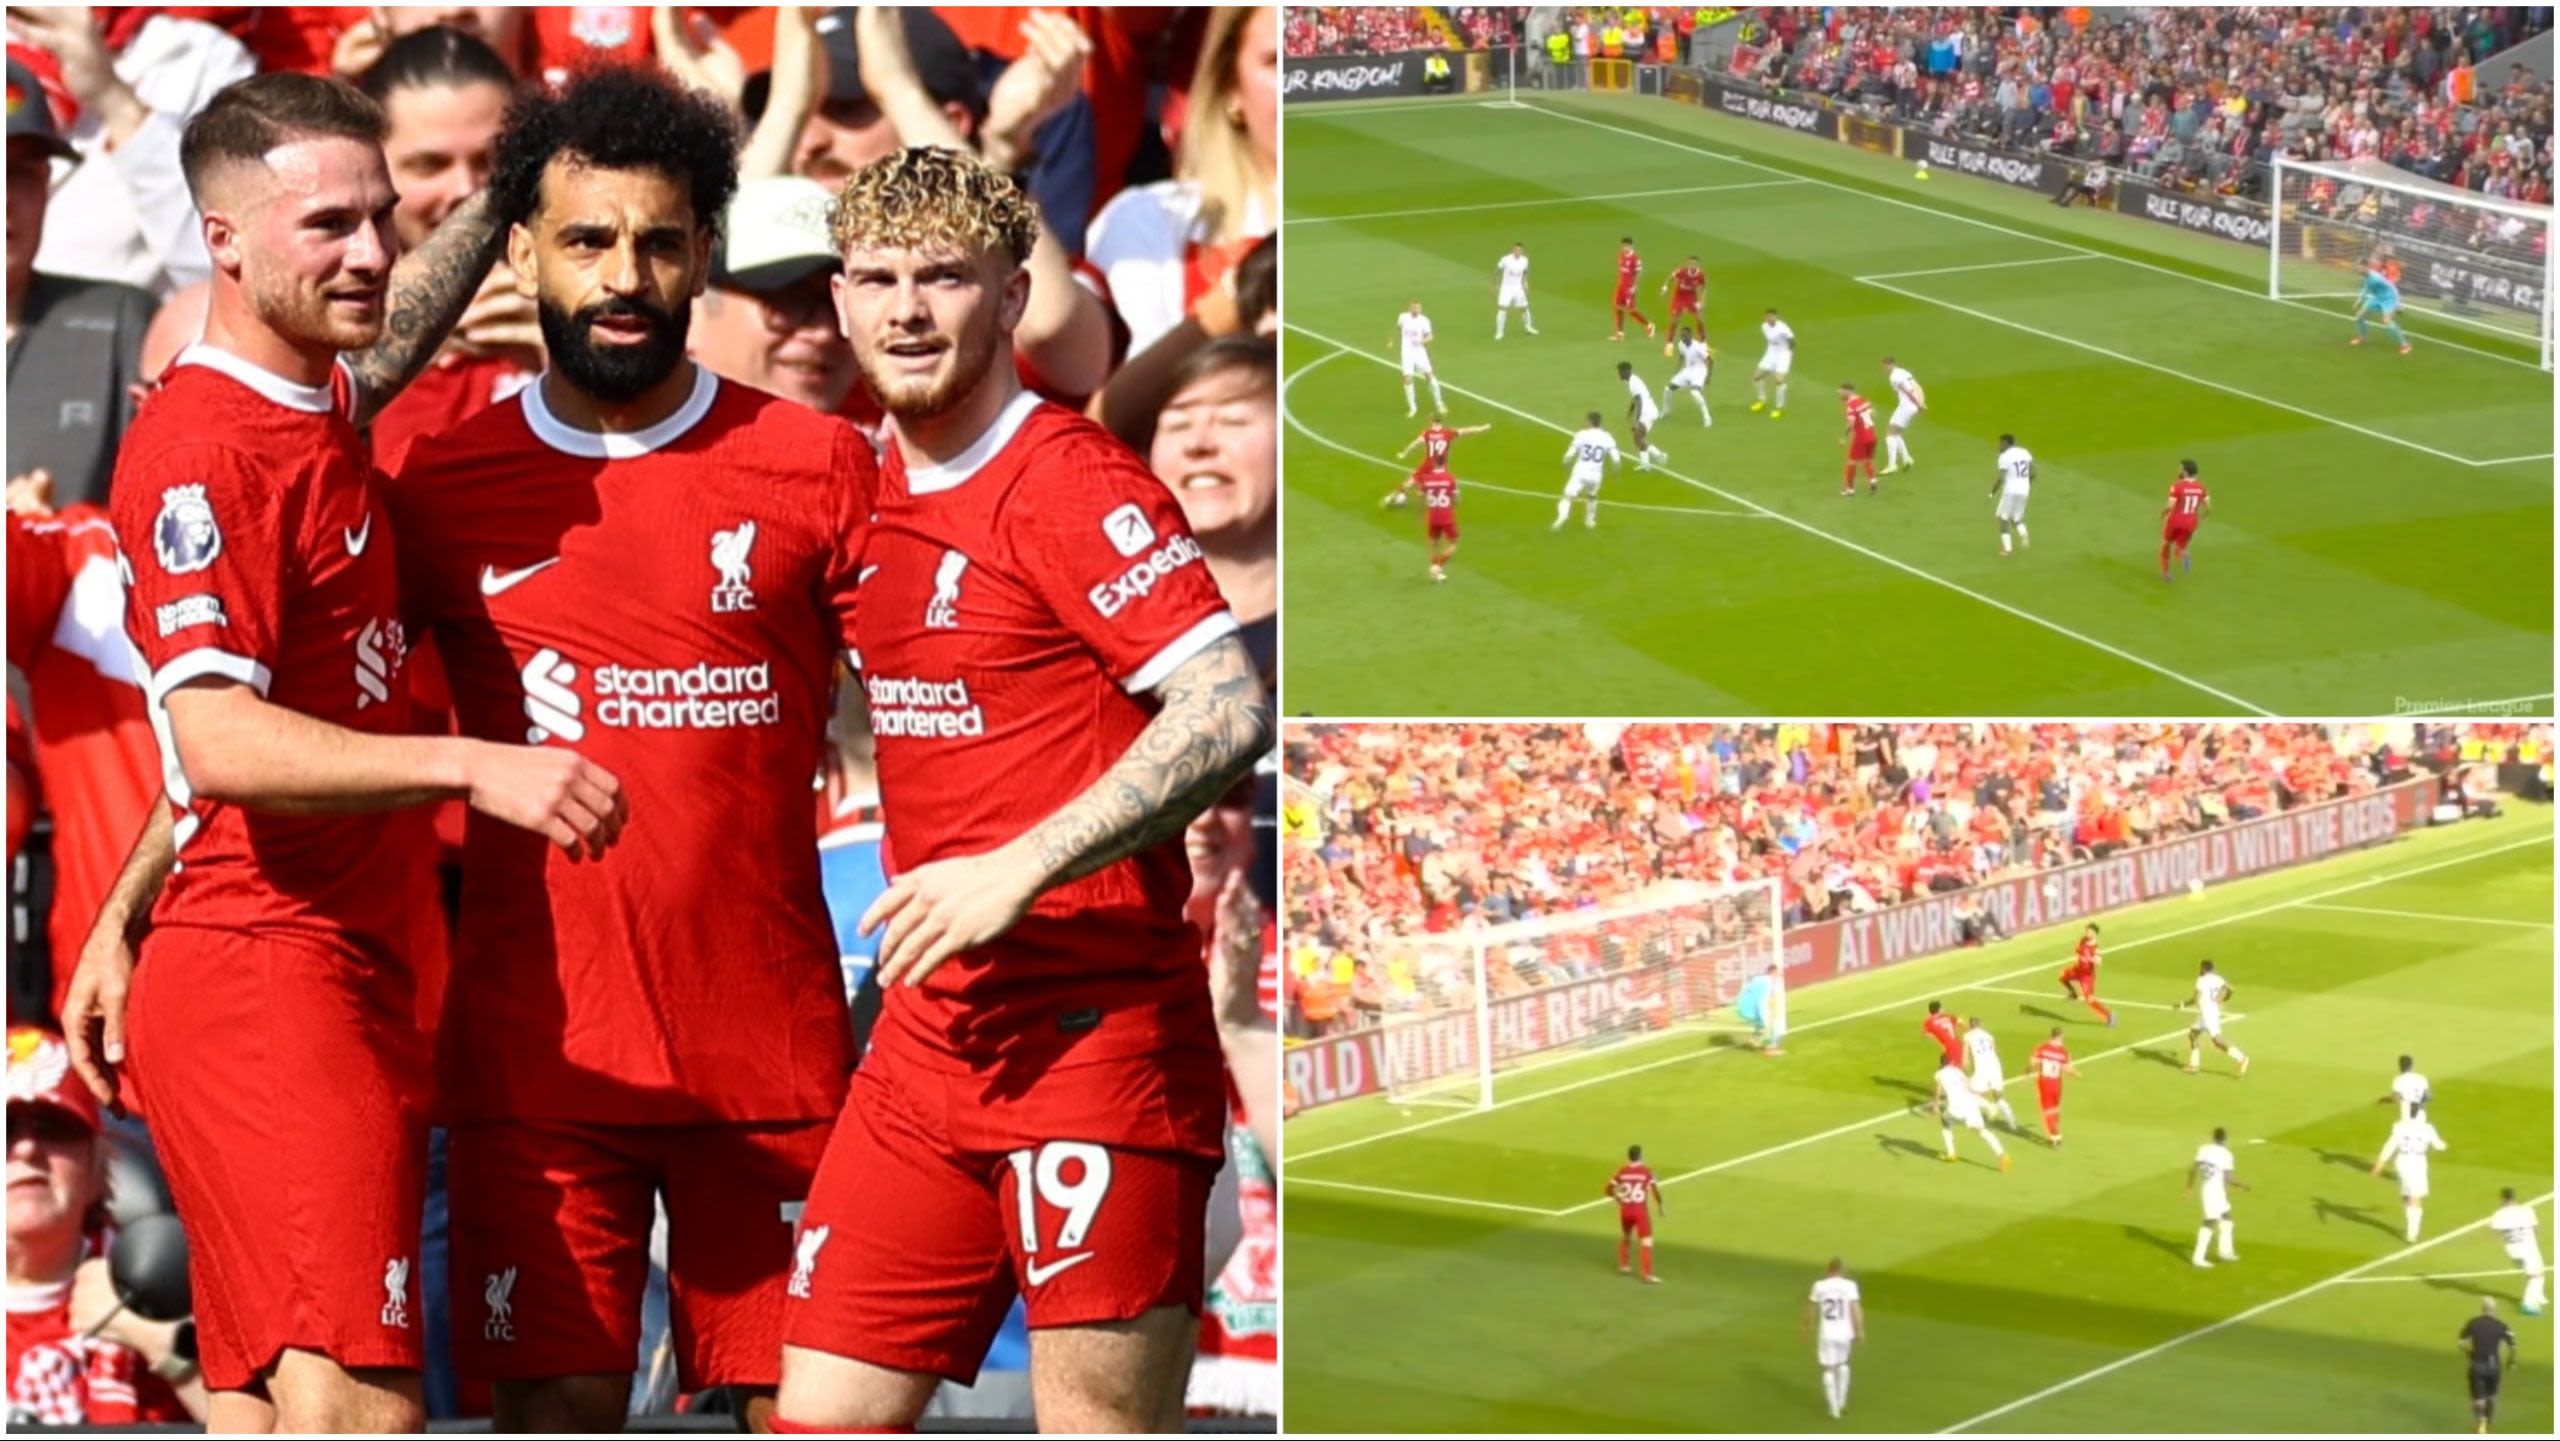 Liverpool 4-2 Tottenham: Player Ratings and Match Highlights